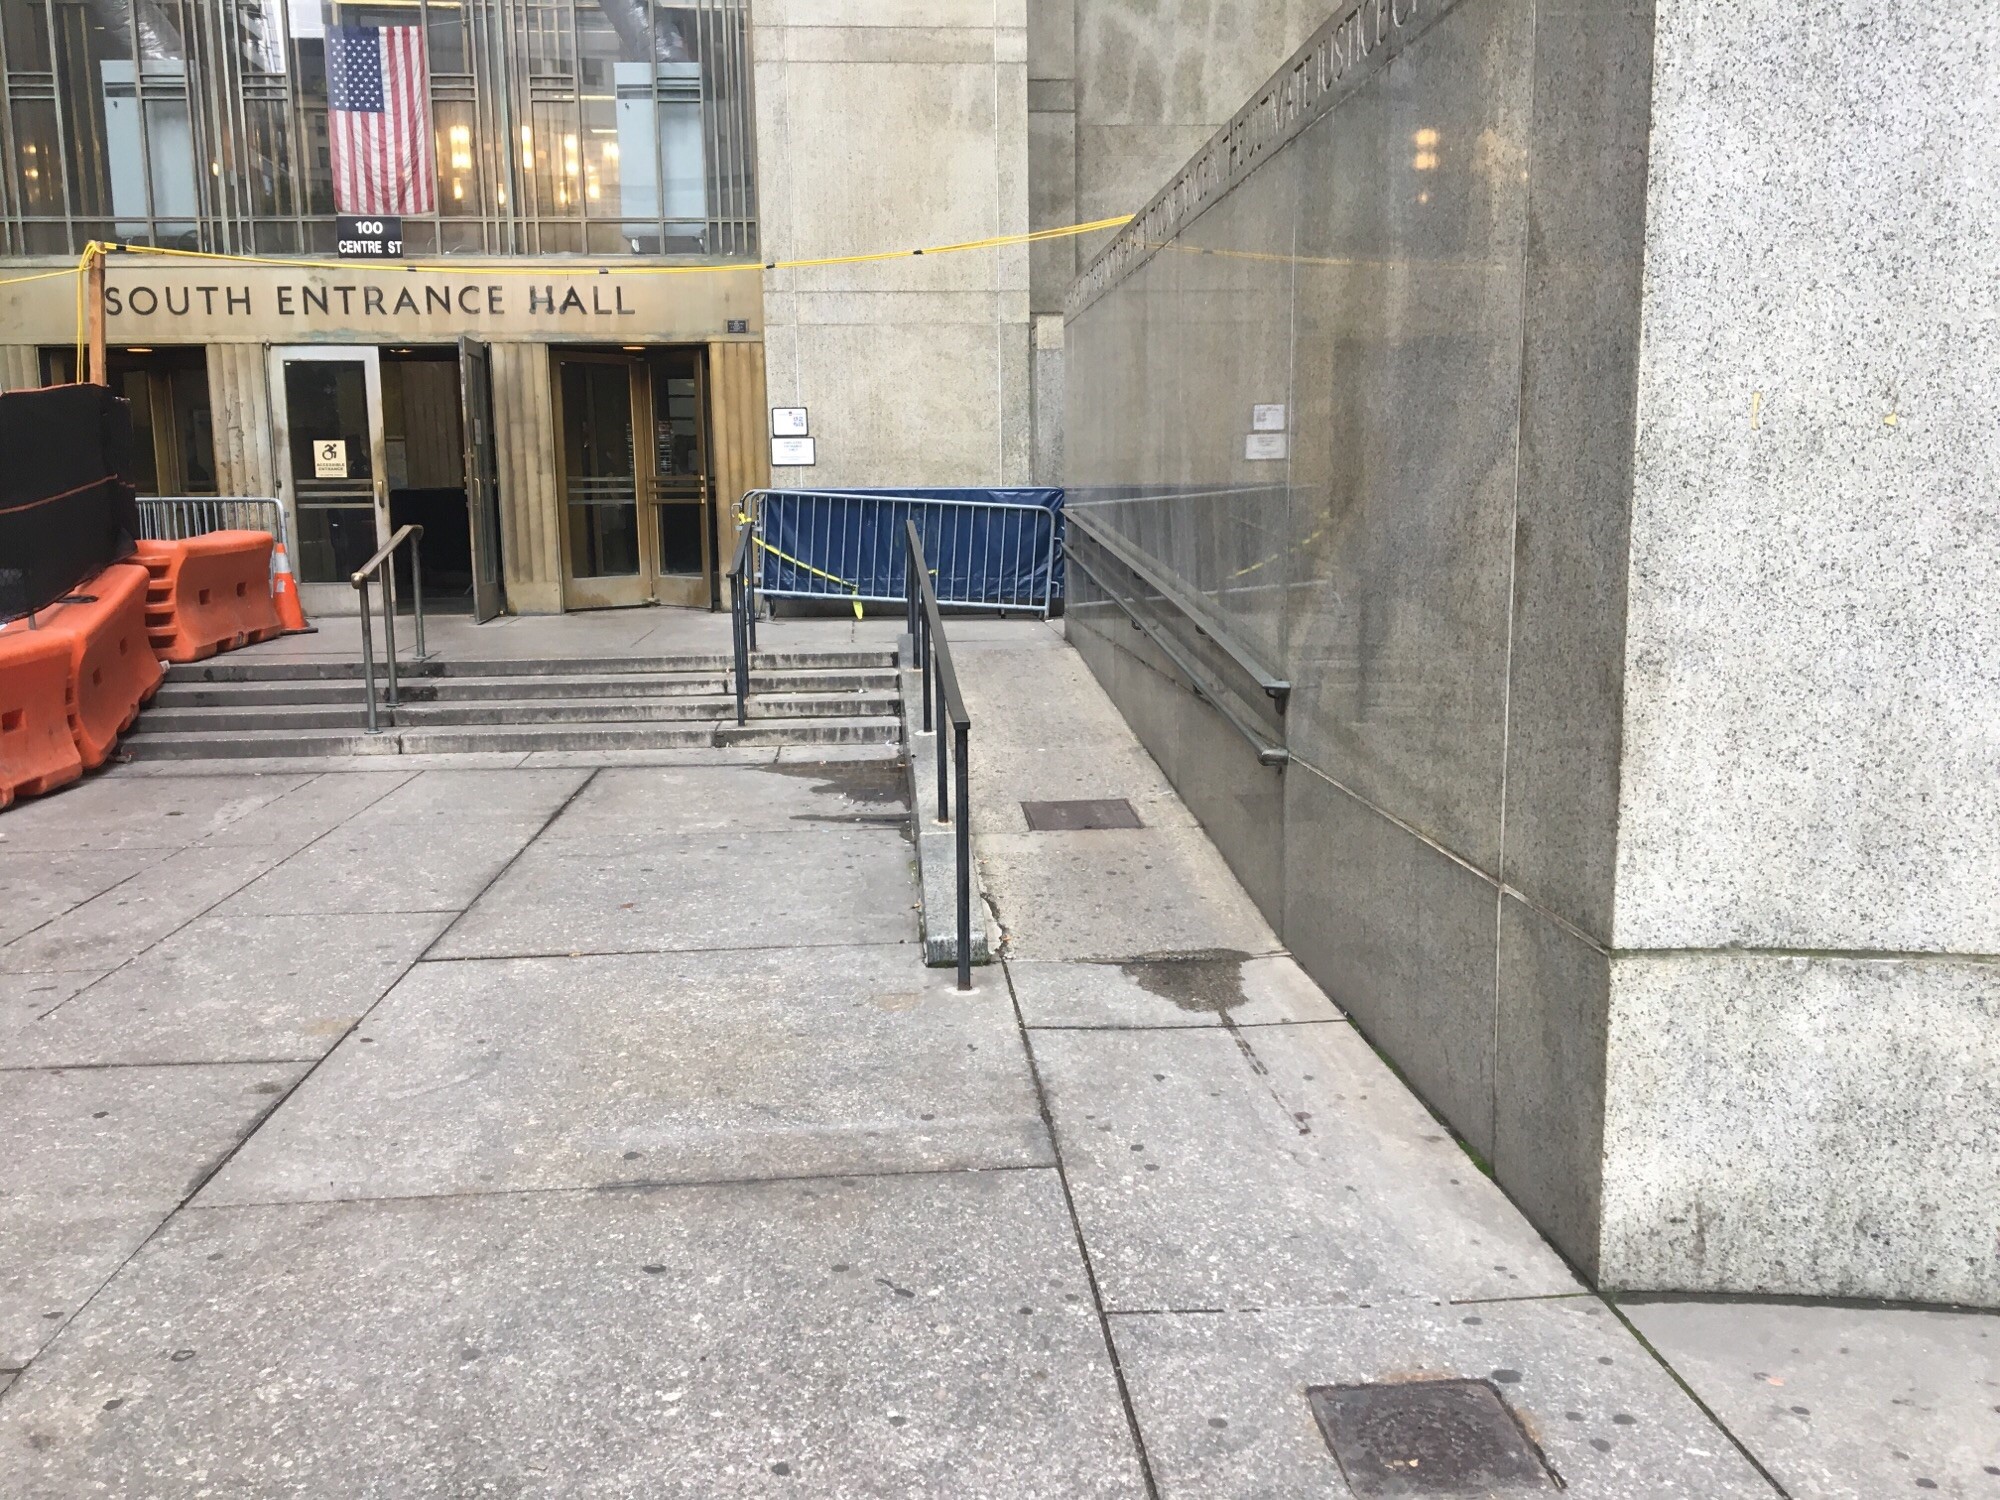 A walkway leading to steps. The steps lead to two revolving doors separated by double doors entry. The double door entry is open. To the right of the walkway is a ramp that leads to the entrance area.